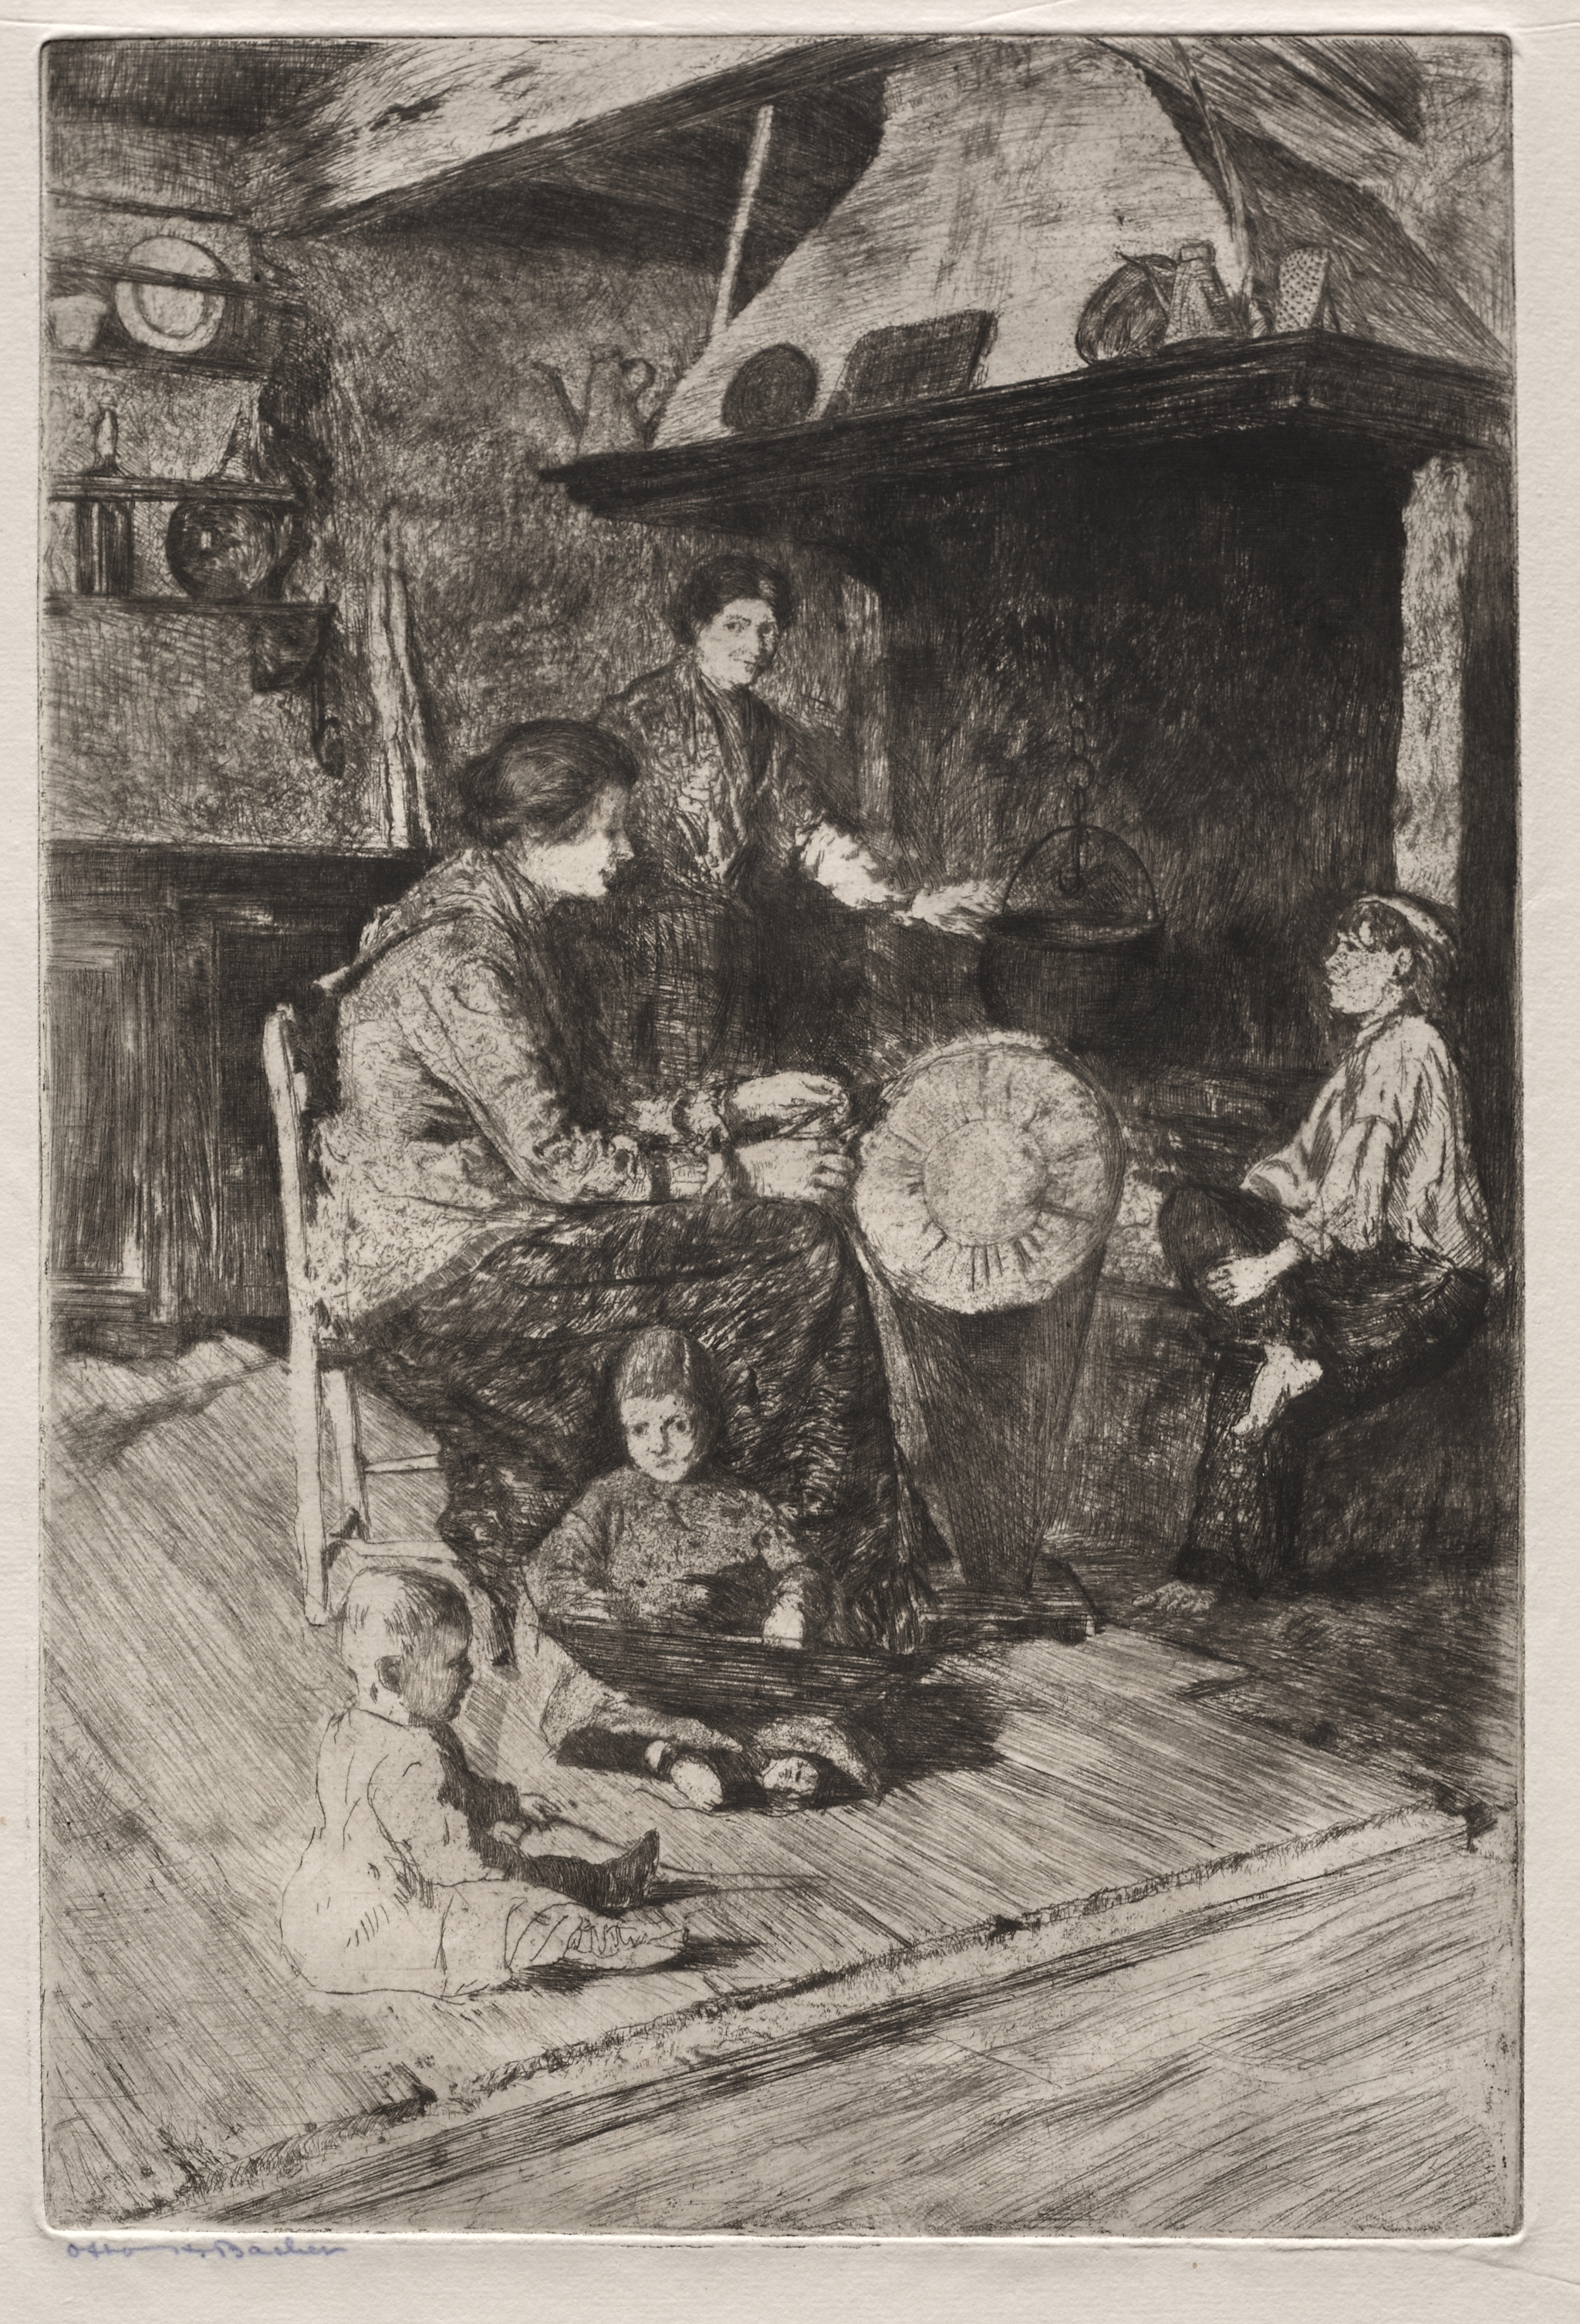 Etchings of Venice: The Lace Makers